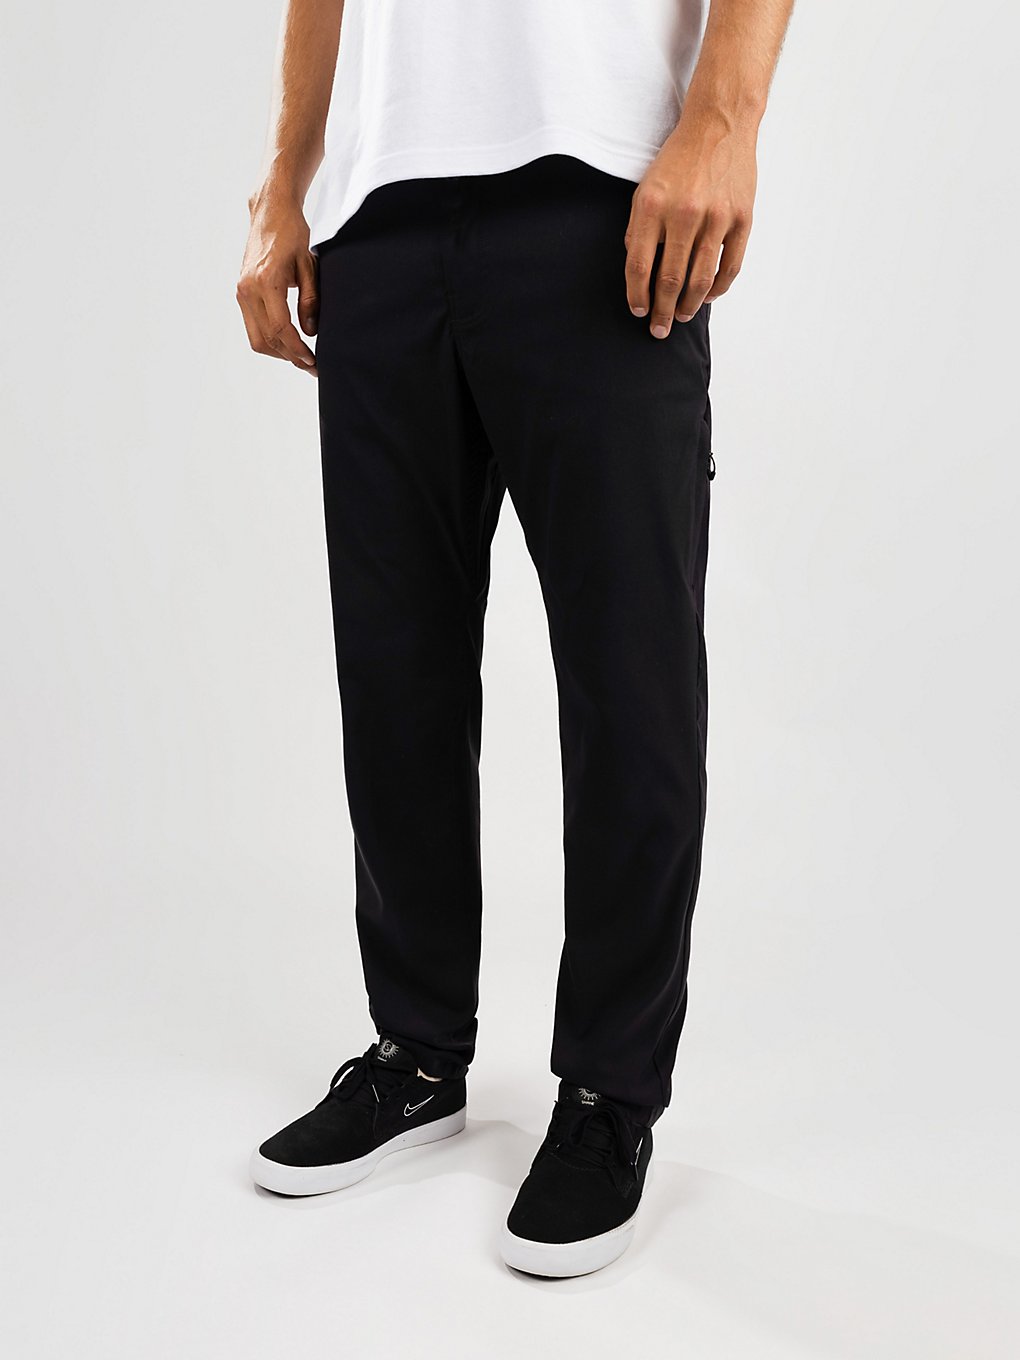 686 Everywhere Relax Fit Pants black kaufen